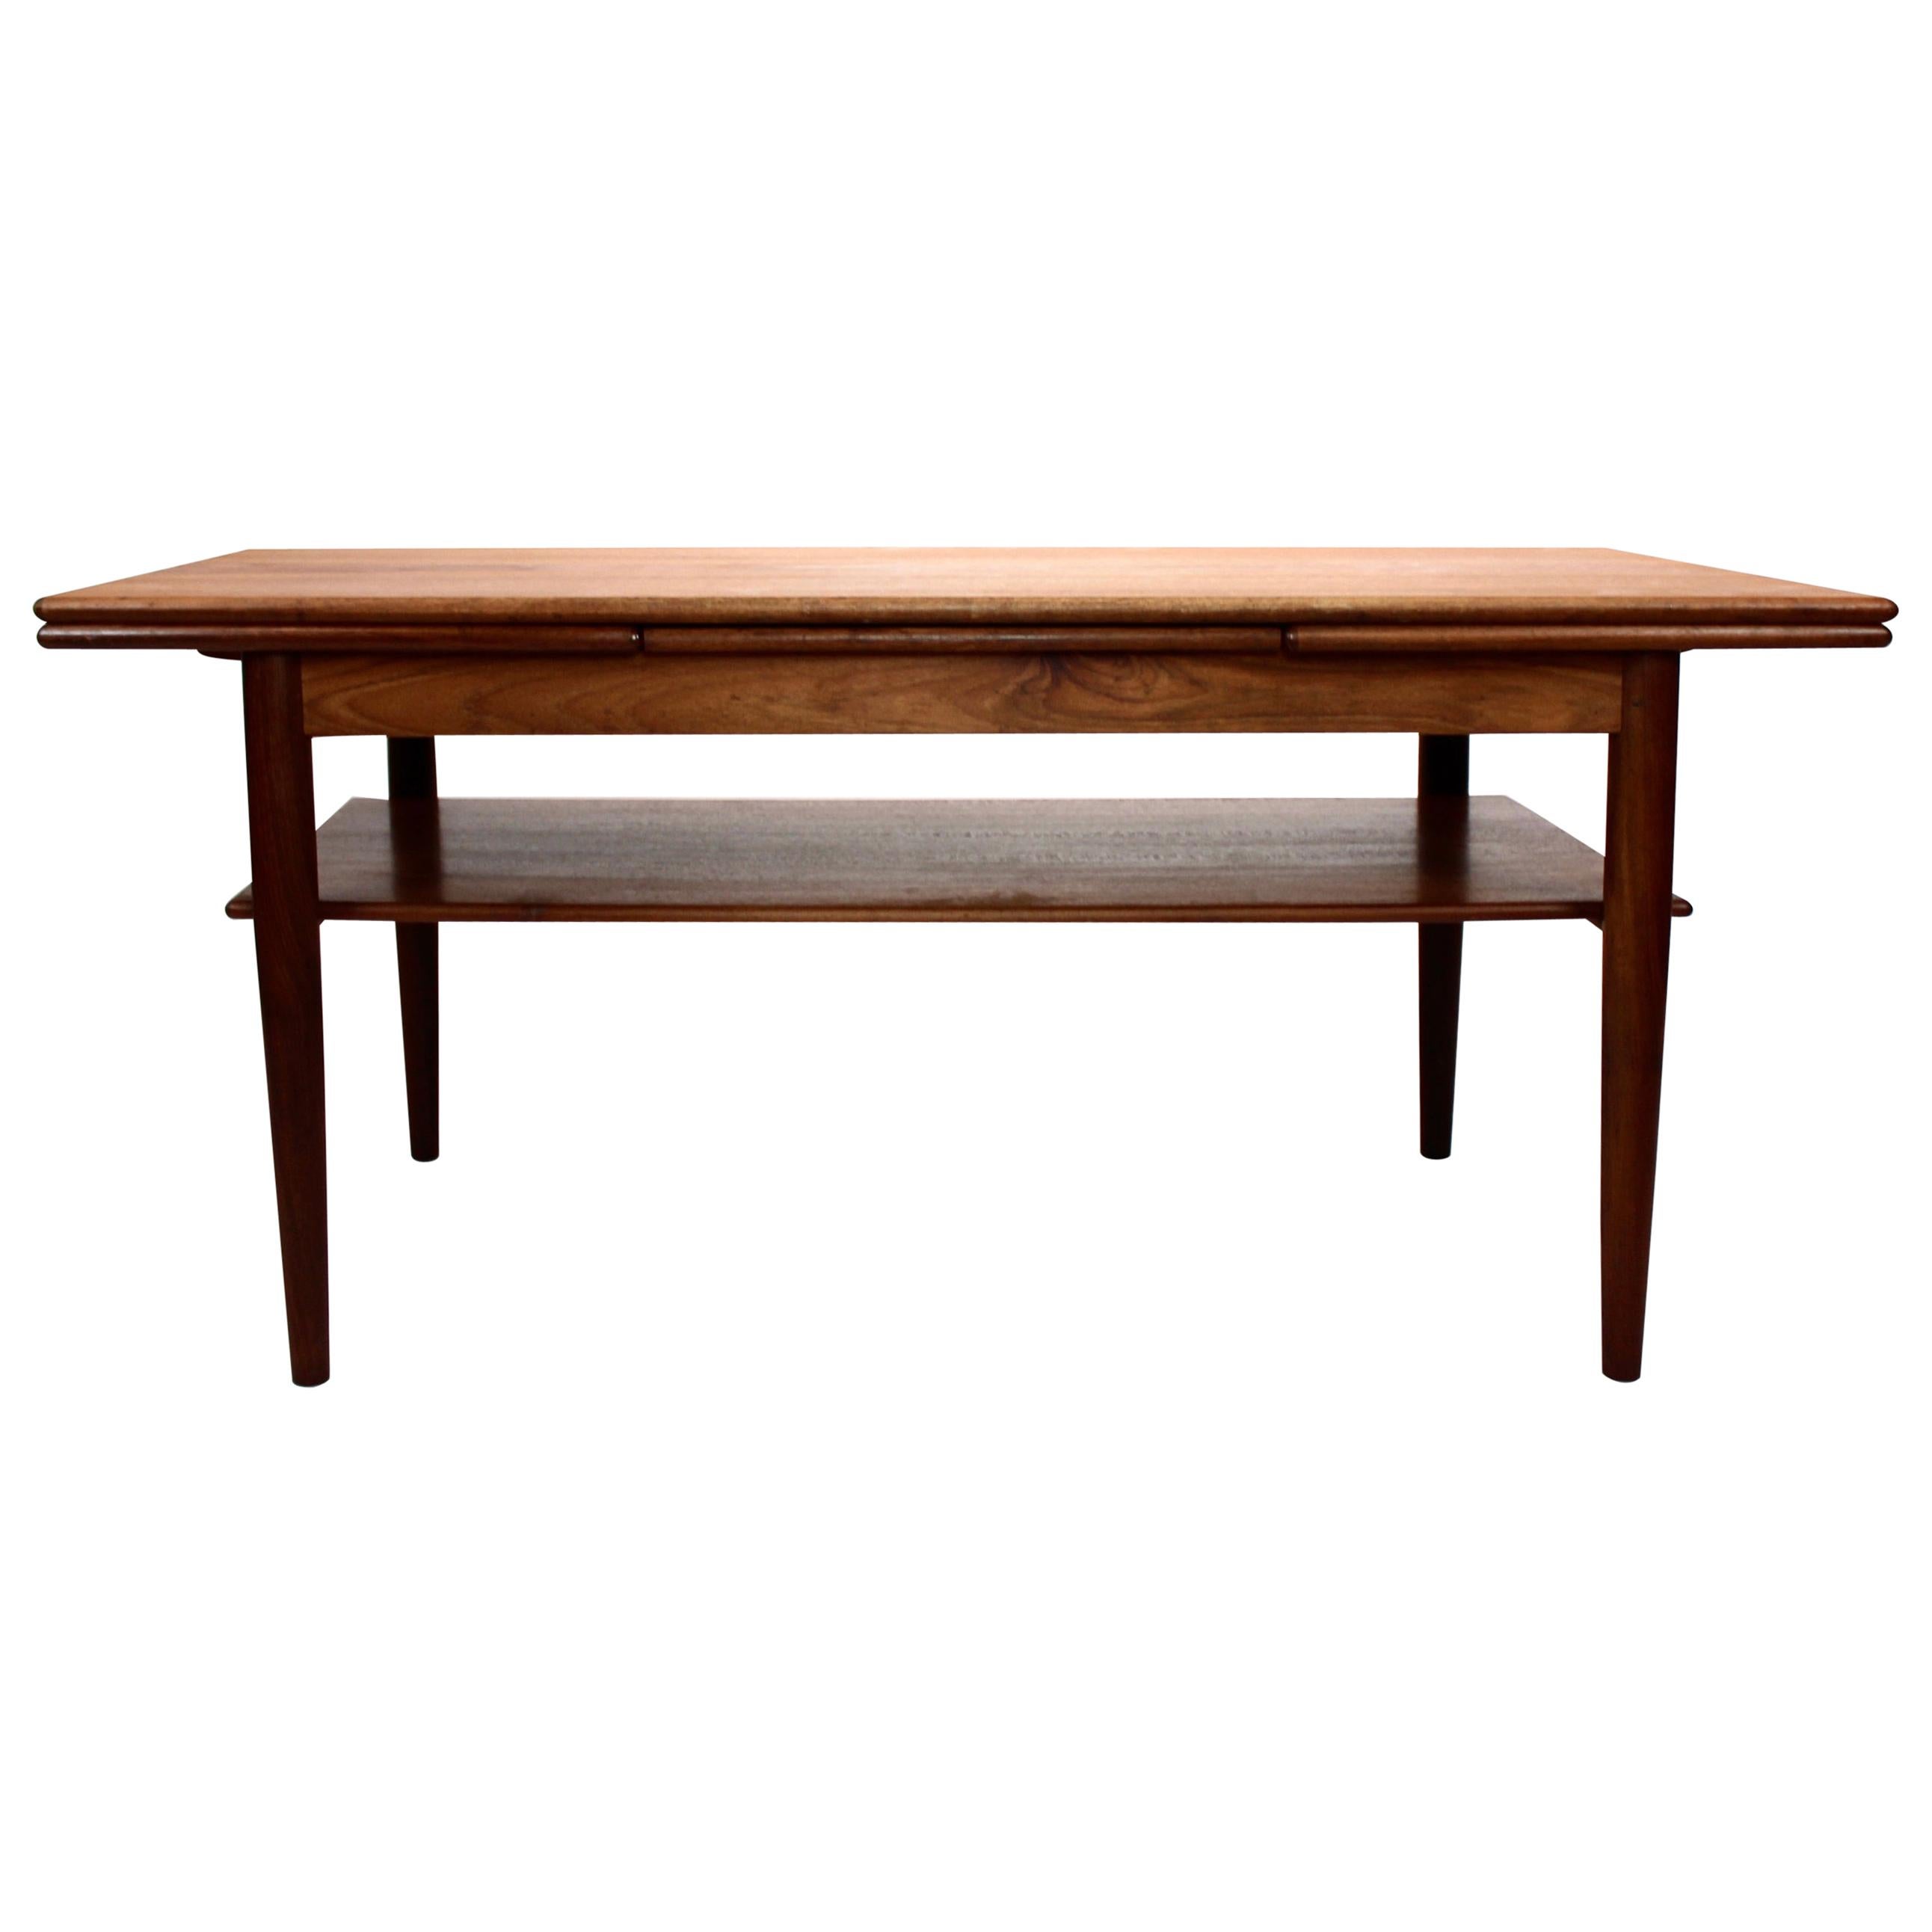 Coffee Table in Teak with Extension Leaves of Danish Design from the 1960s